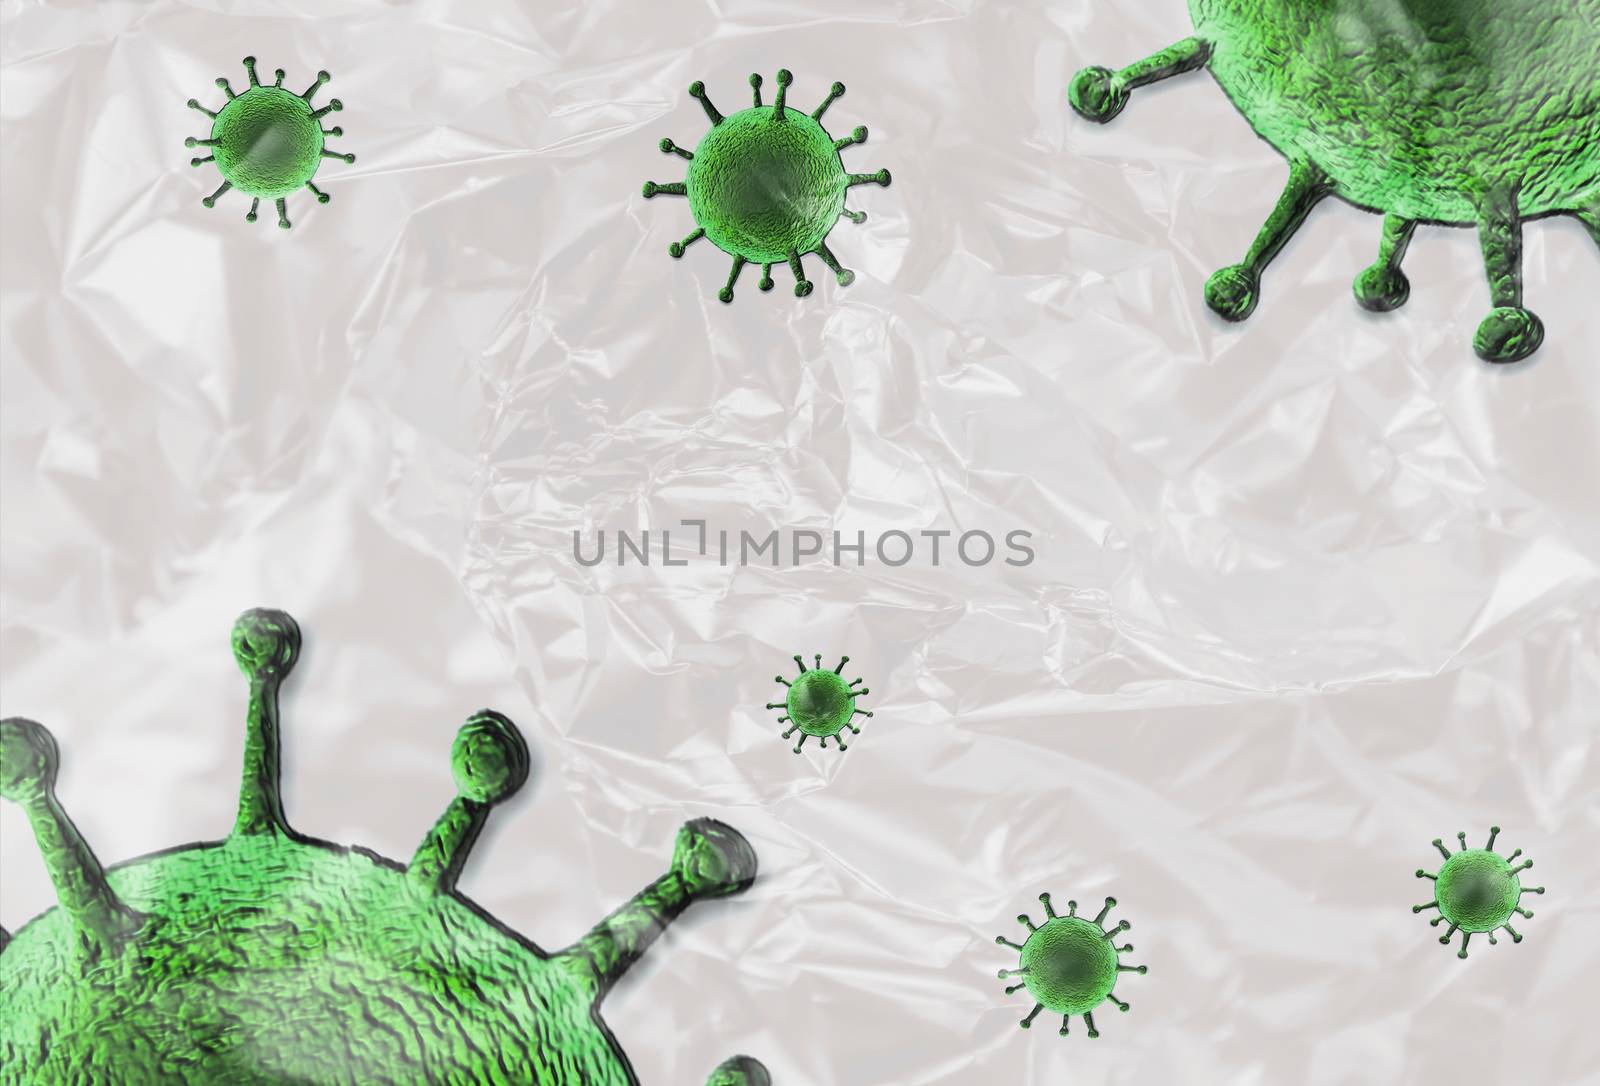 3D-Illustration of colorful isolated corona virus covered by plastic film on a white background.